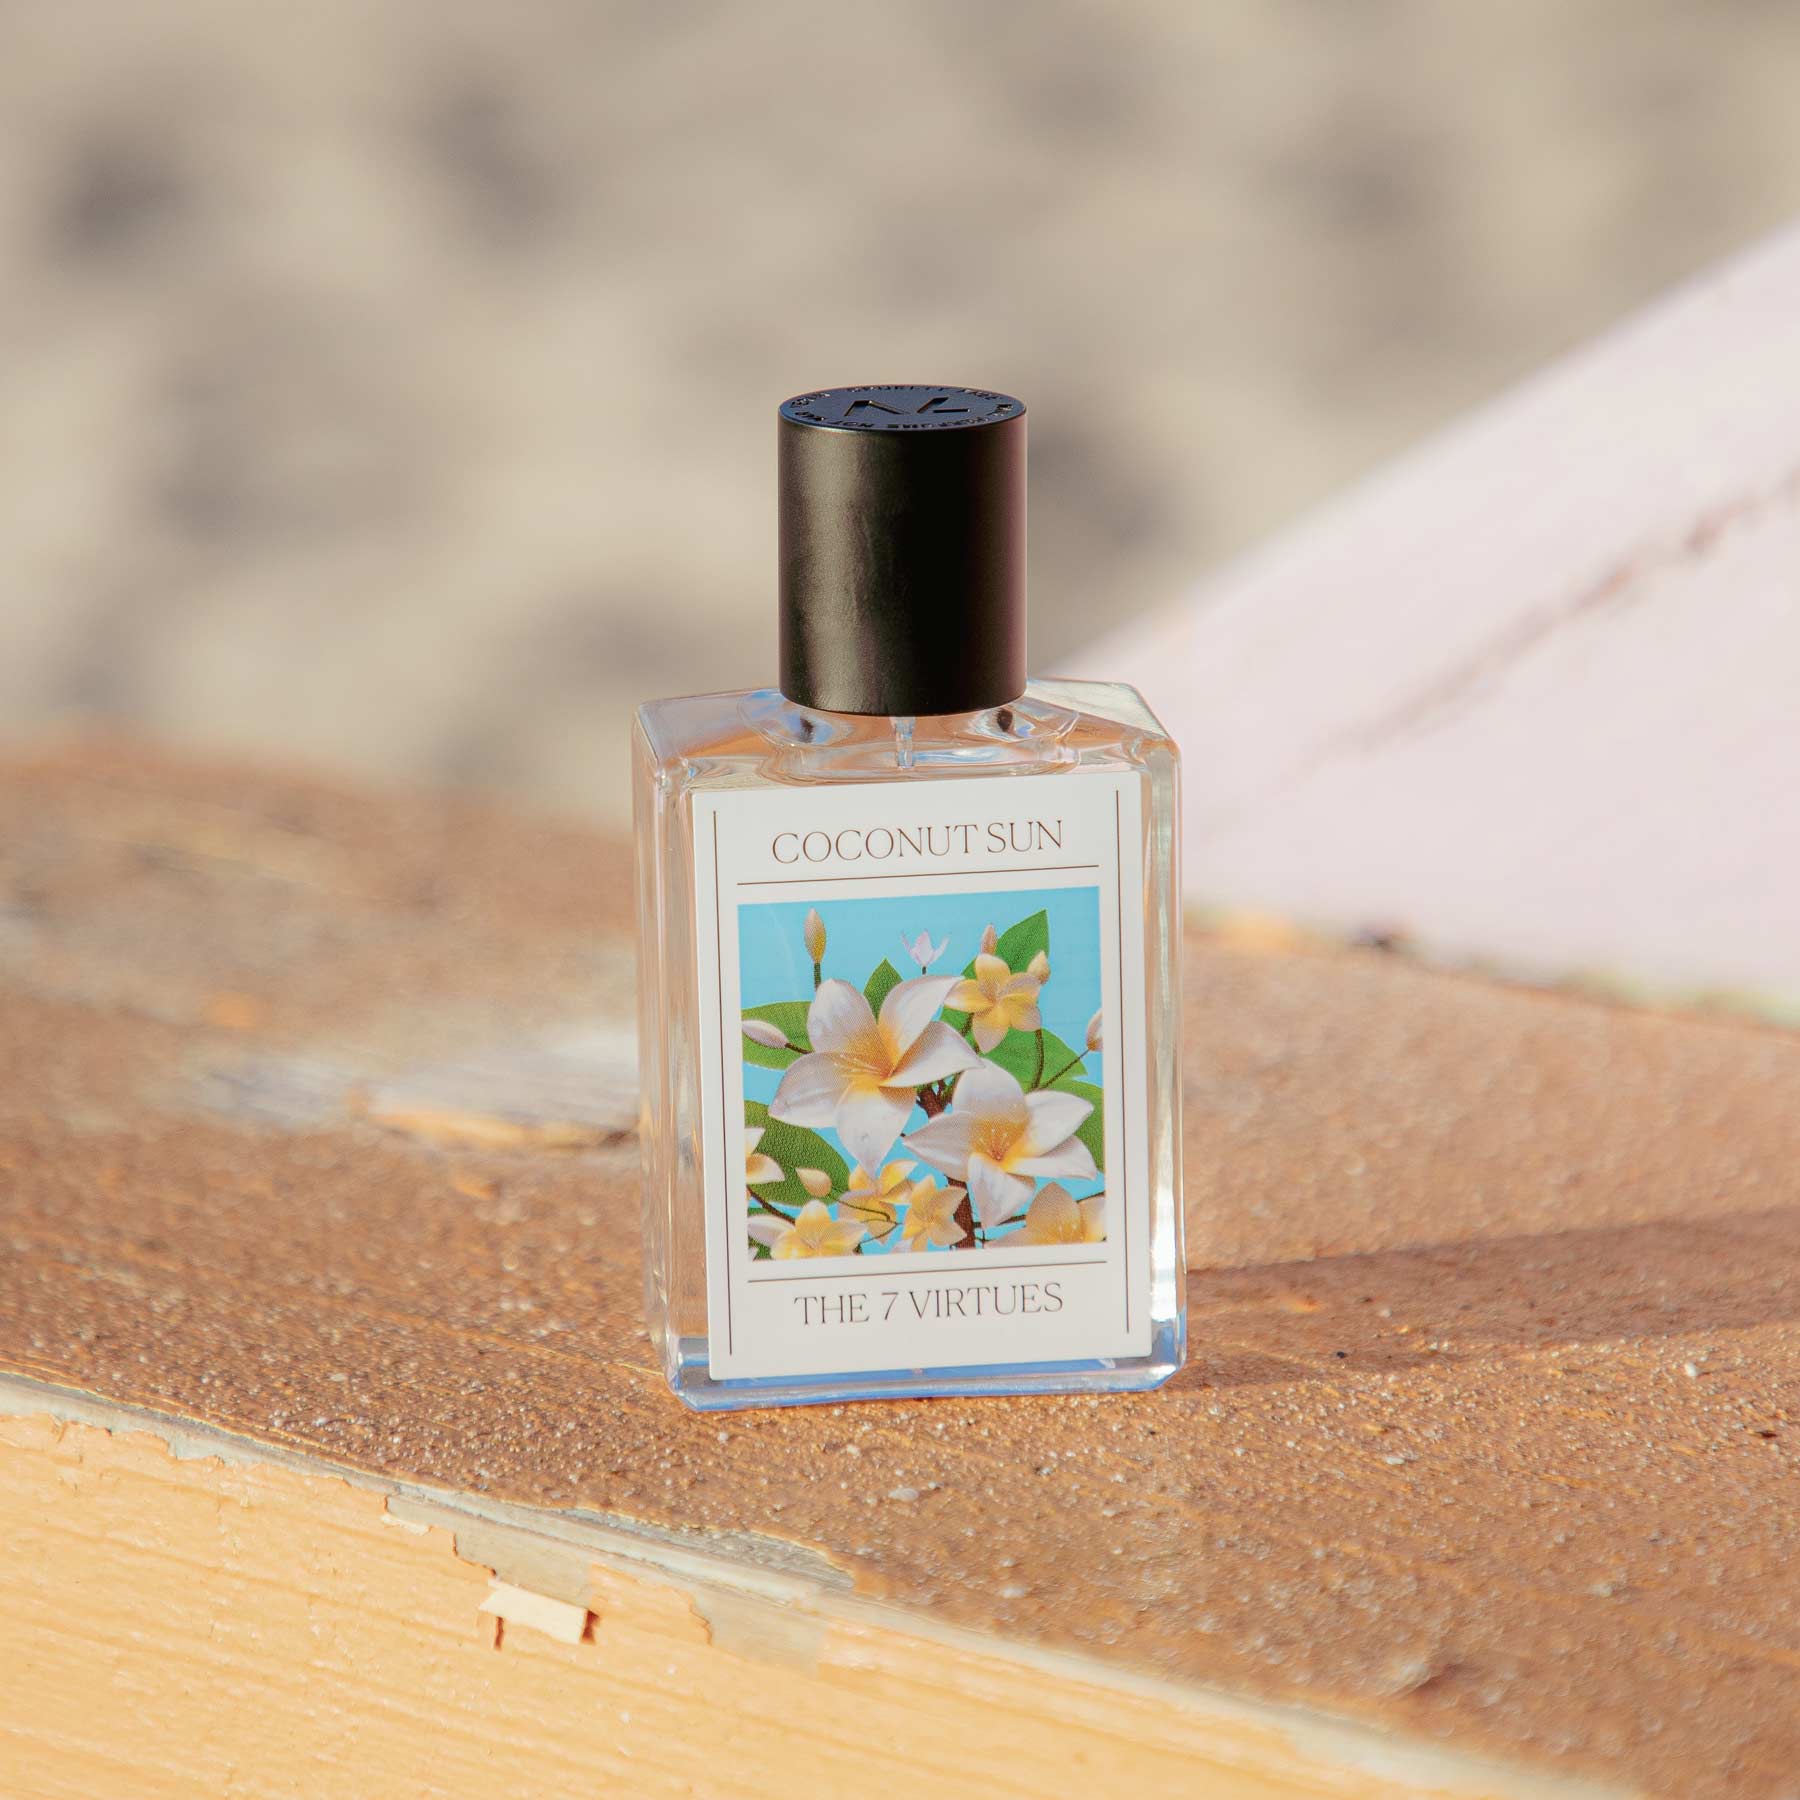 Summer perfumes are a ticket to your dream vacation